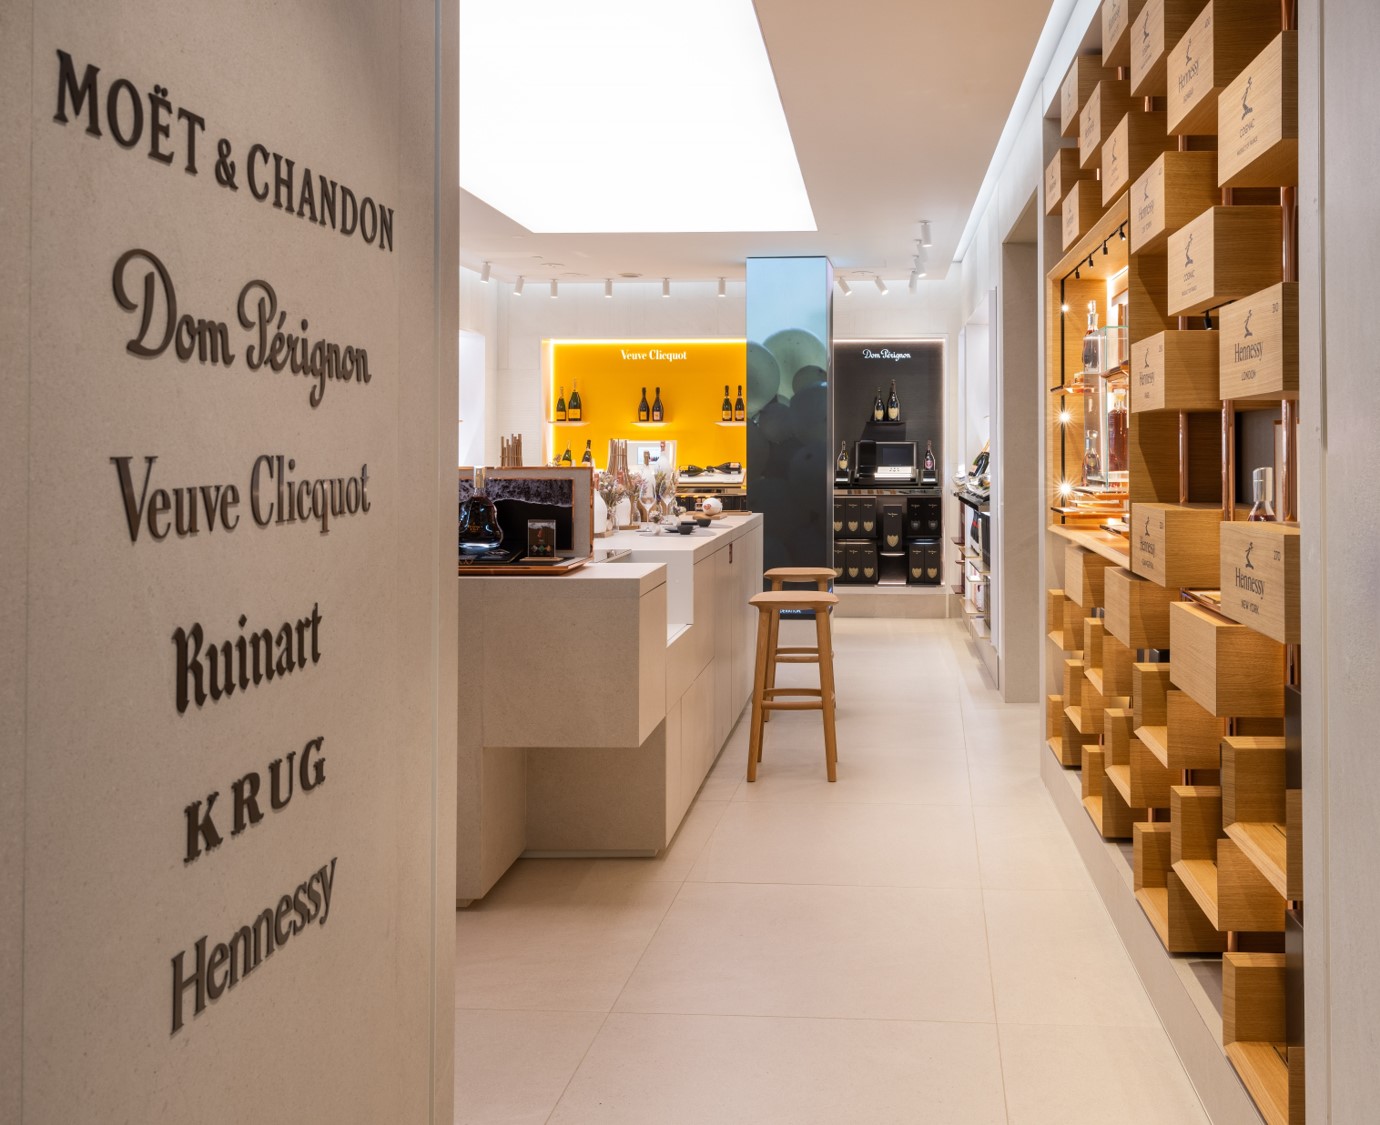 Moët Hennessy inaugurates new contemporary concept for “Les Caves